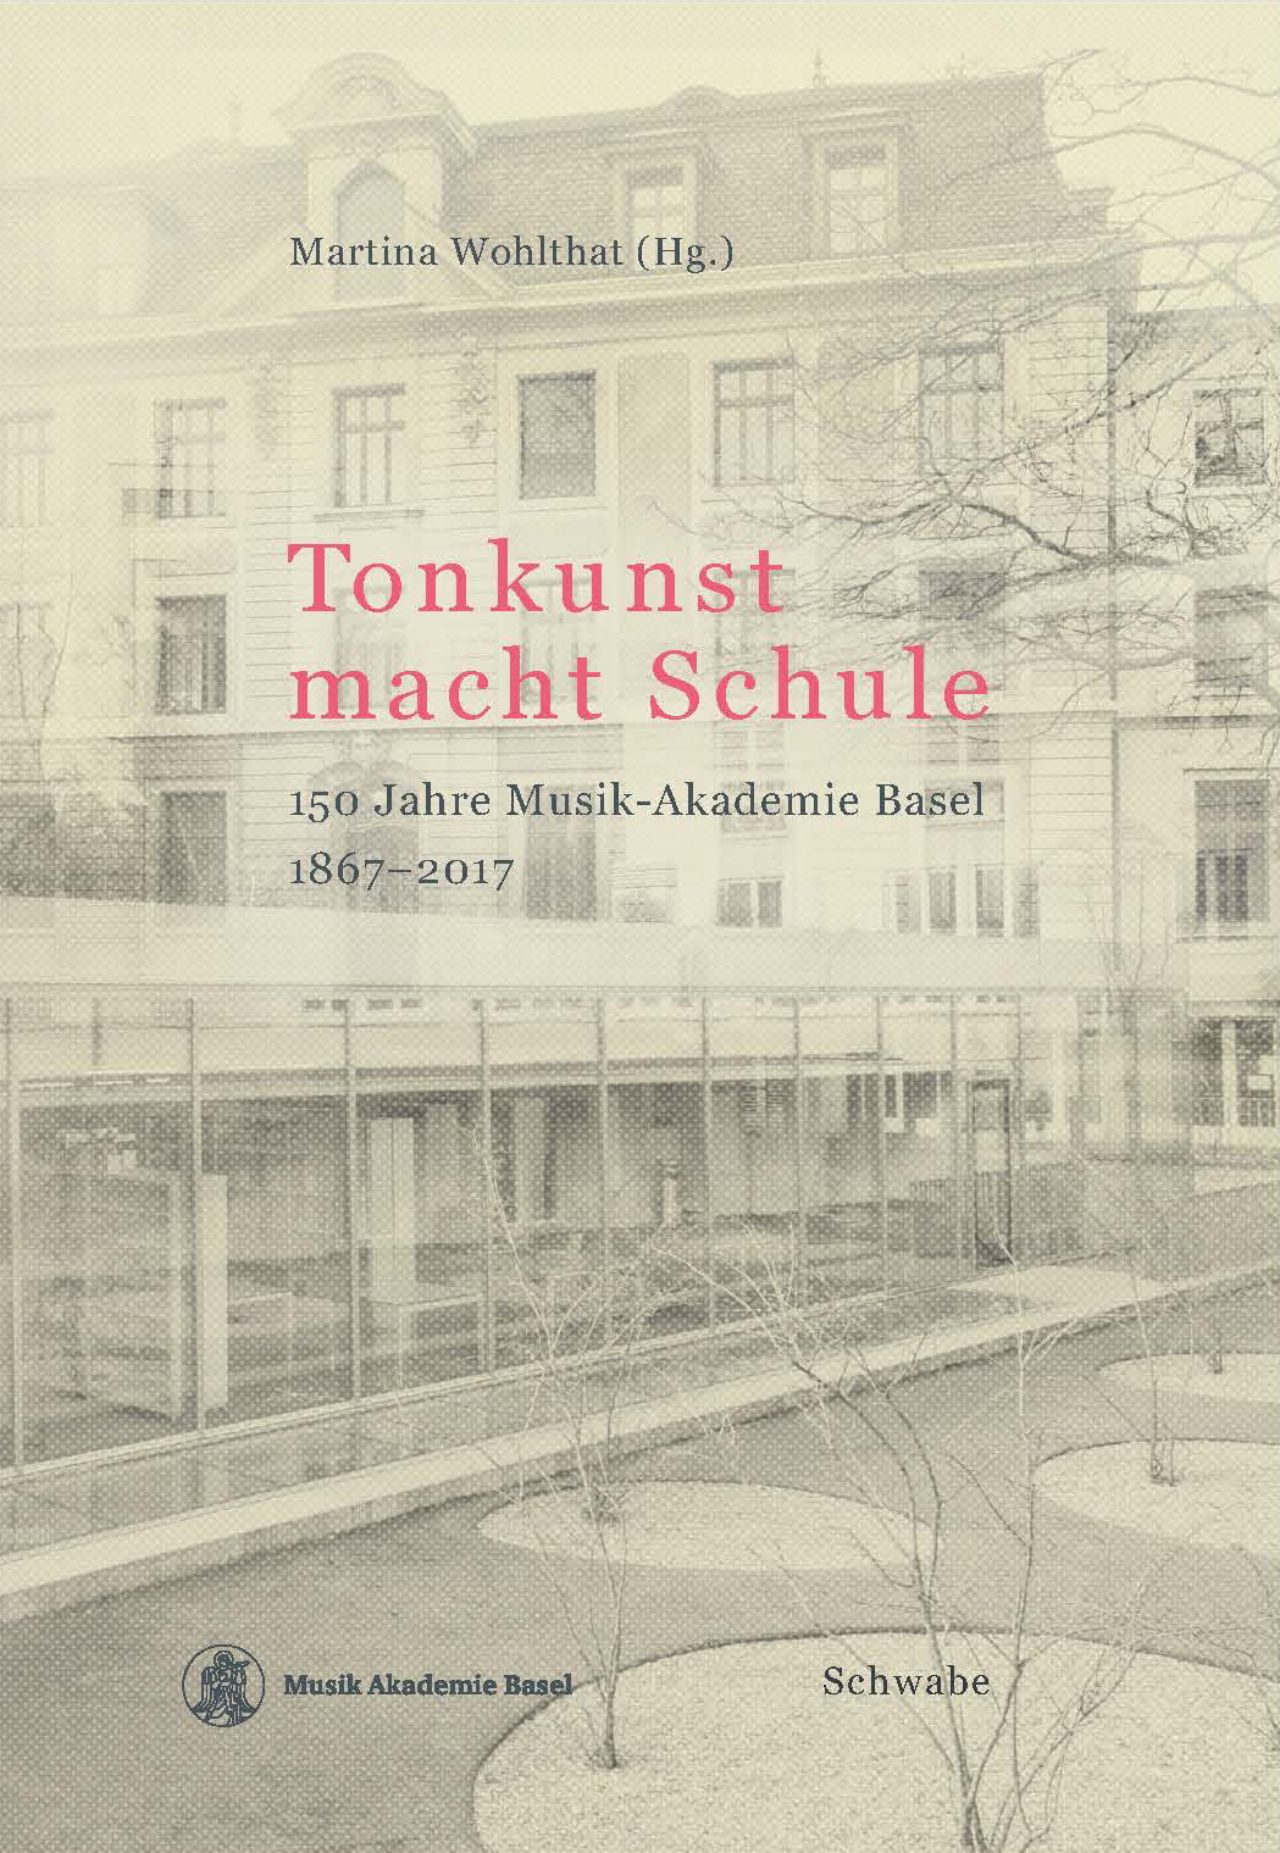 Cover of the publication "Tonkunst macht Schule"